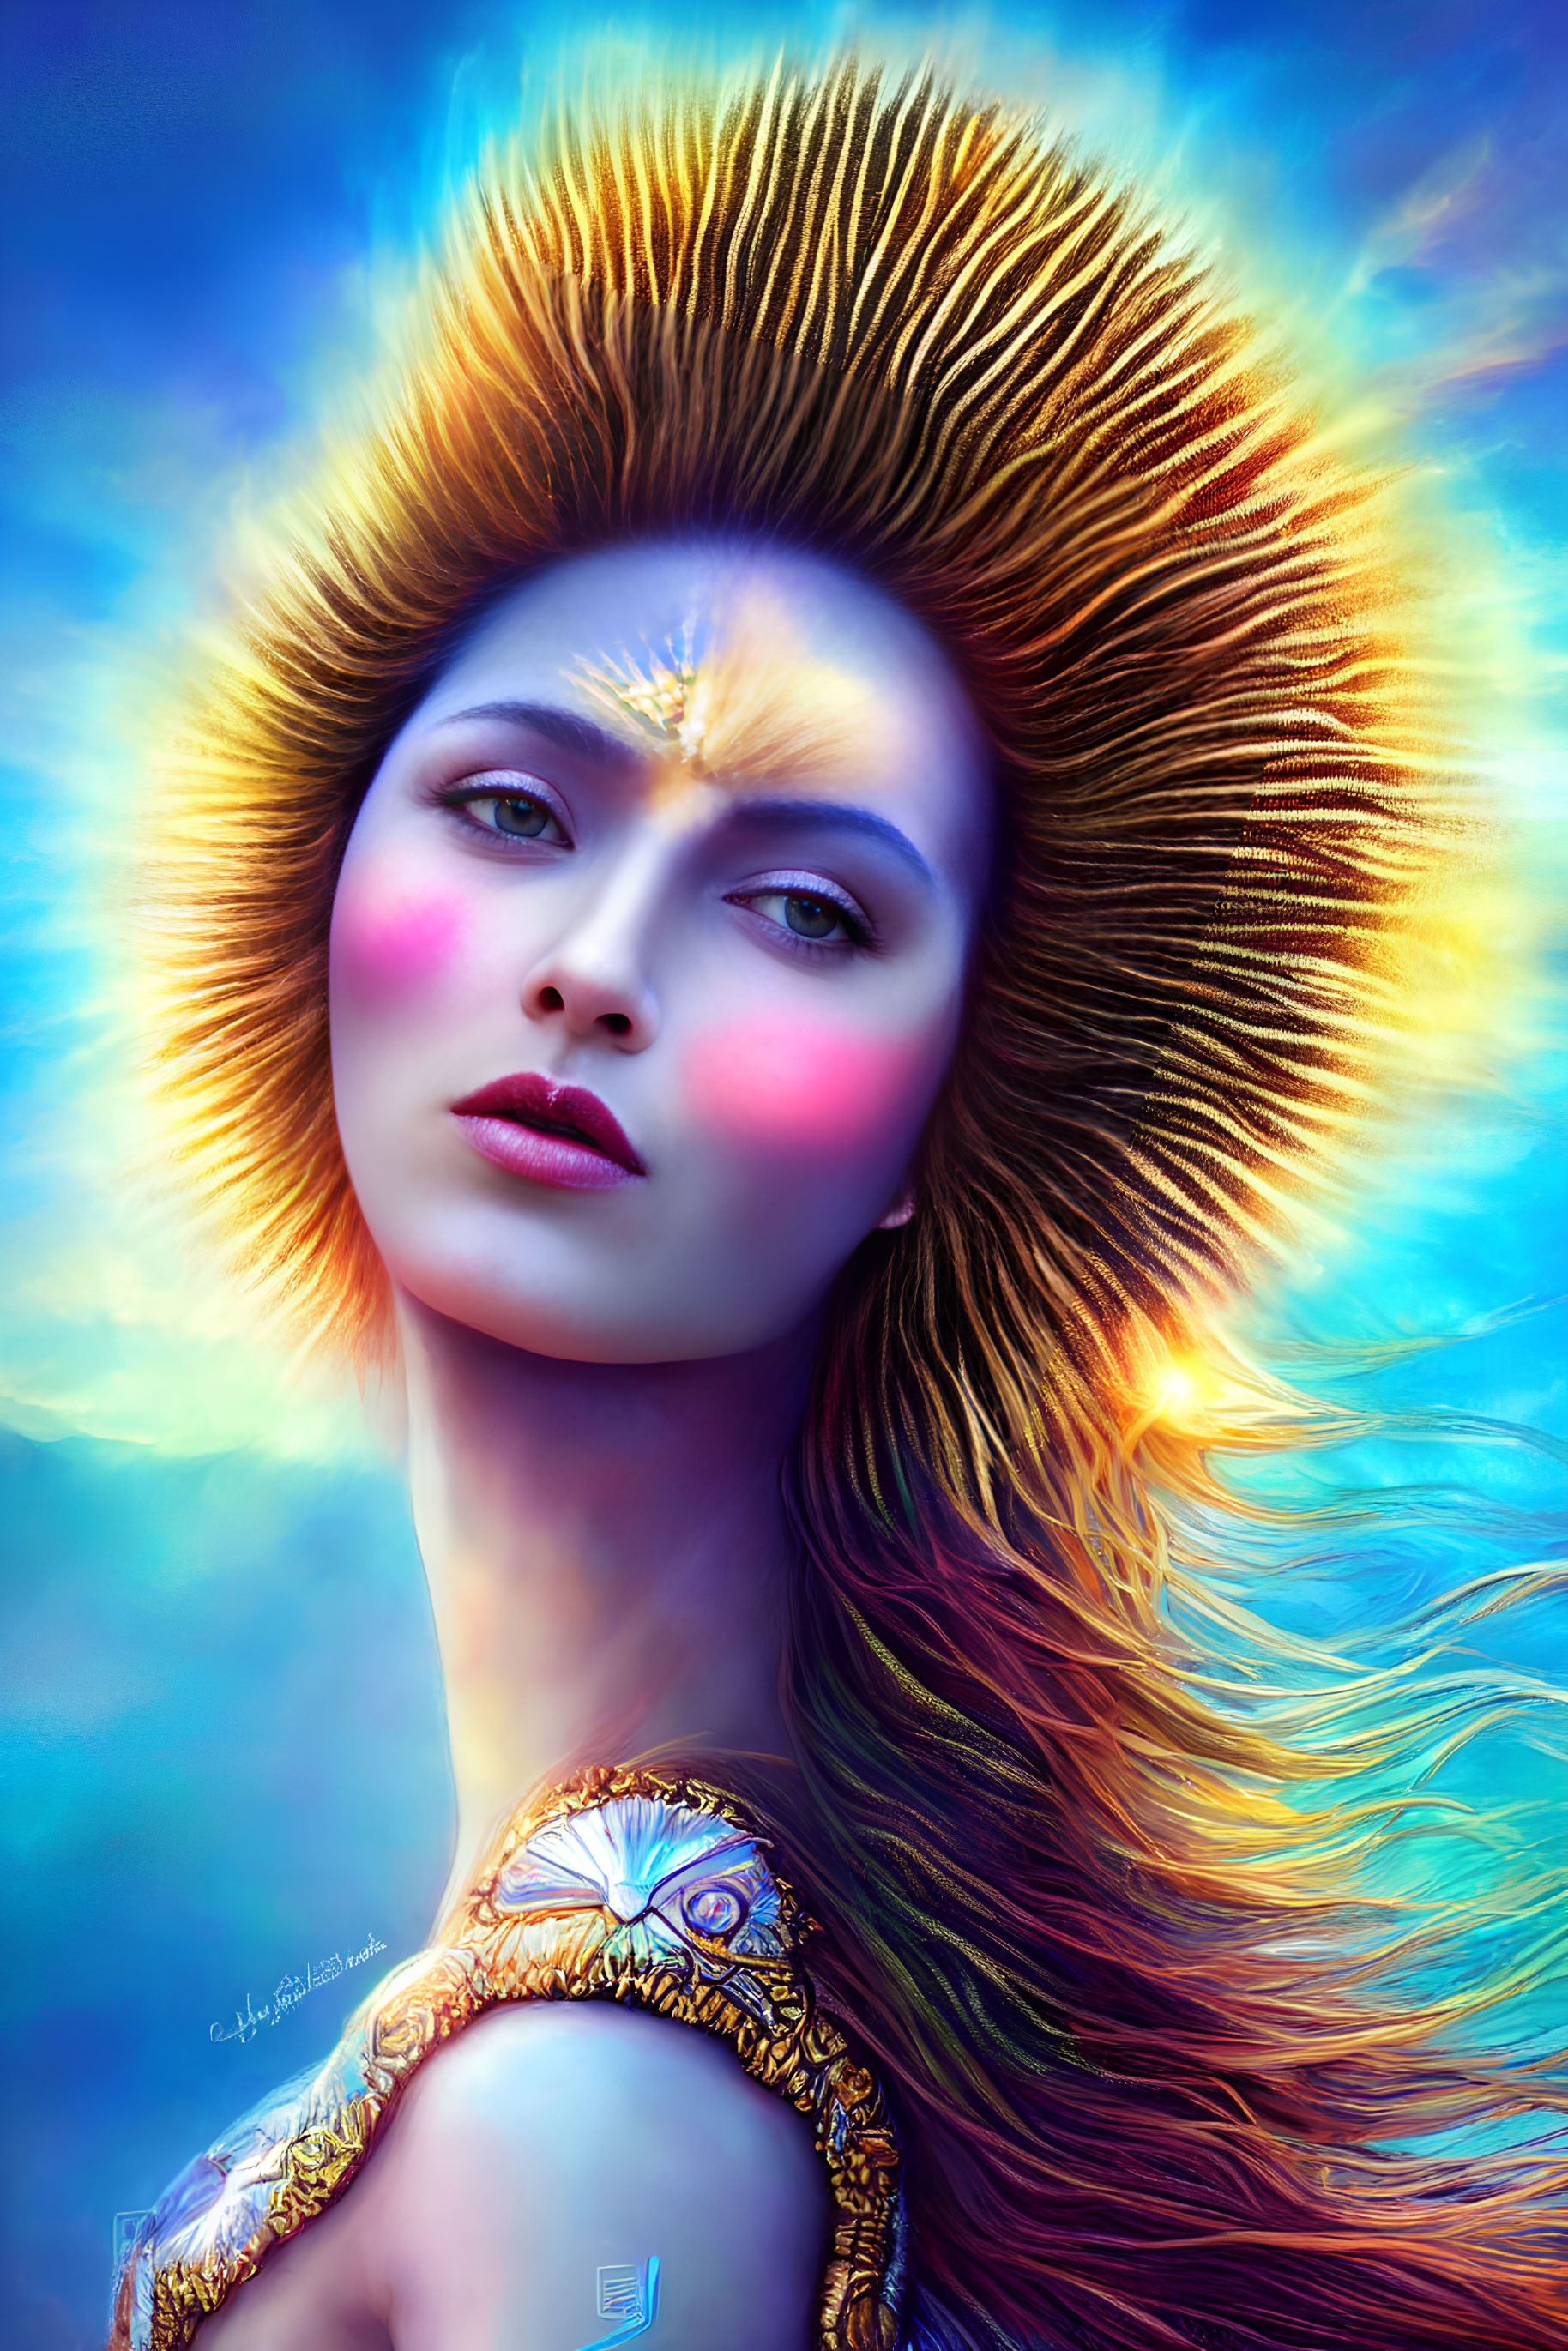 Vibrant digital artwork of a woman with ethereal glow and ornate halo